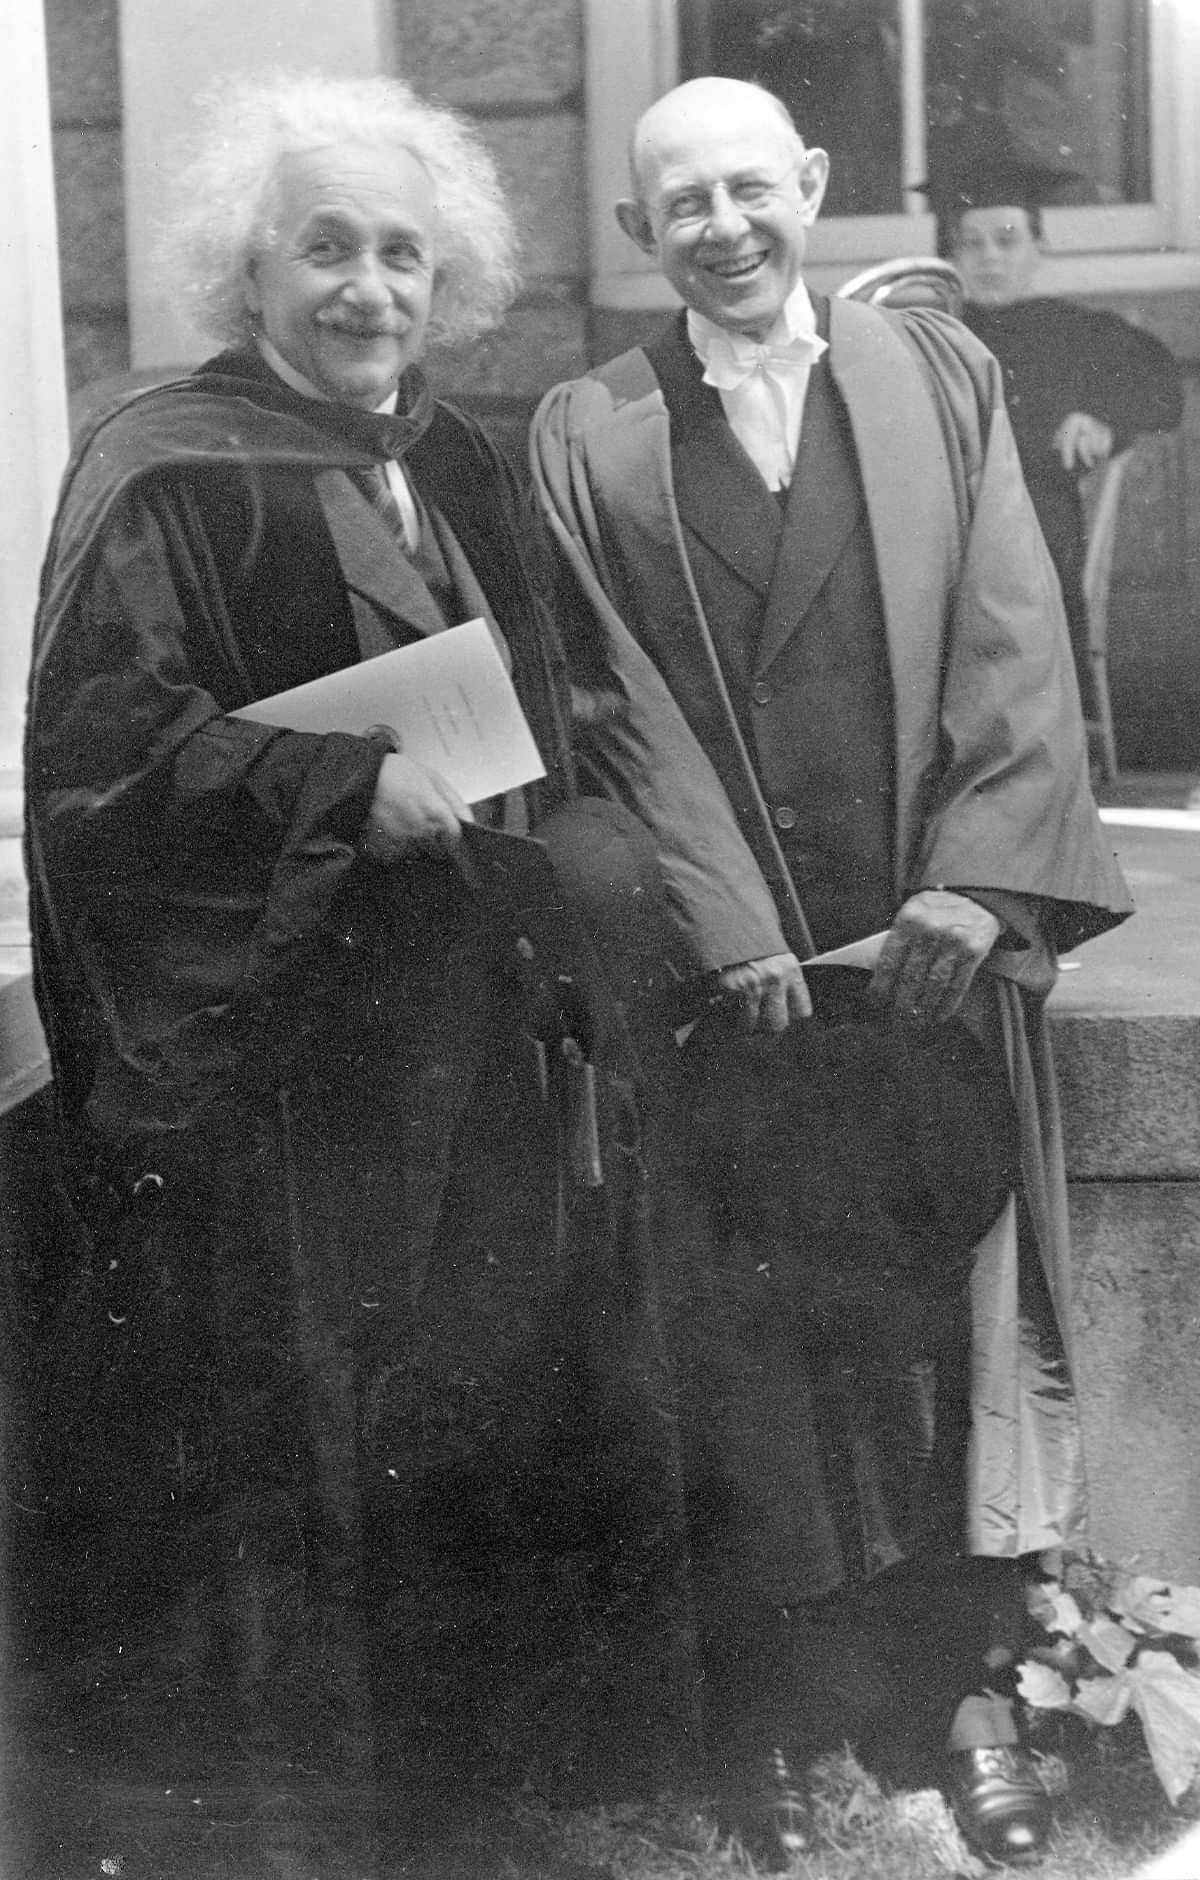 Albert Einstein and Frank Aydelotte, standing together wearing commencement regalia. Einstein is holding a commencement program. In the background is a student (Eugene Lang) sitting in a chair.